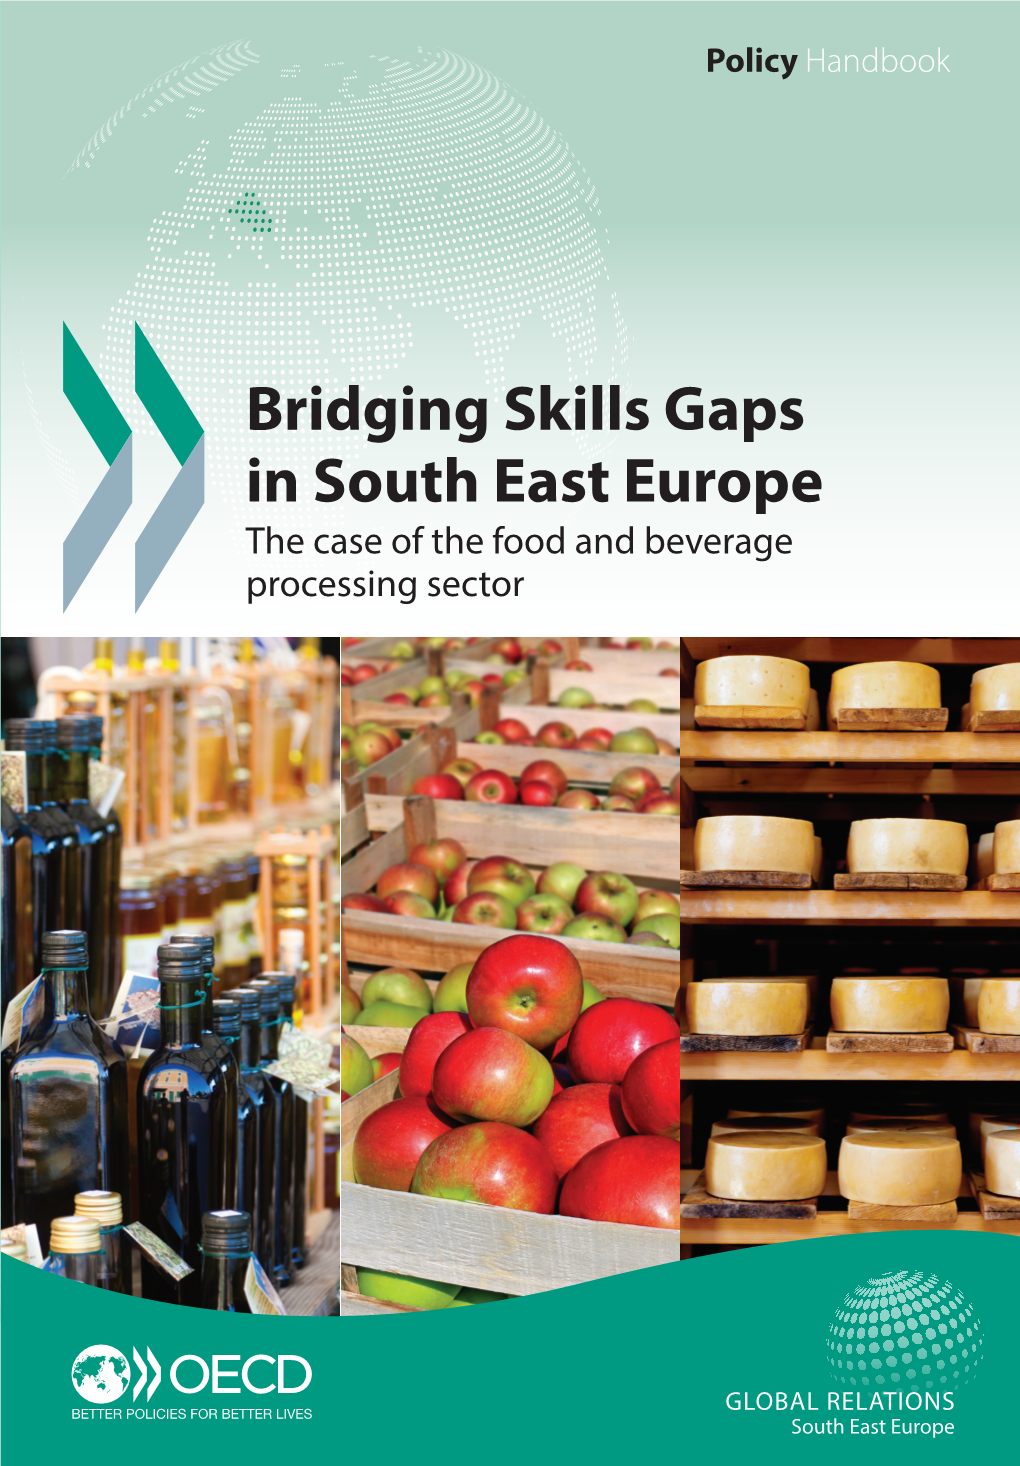 BRIDGING SKILLS GAPS in SOUTH EAST EUROPE the CASE of the FOOD and BEVERAGE PROCESSING SECTOR Bridging Skills Gaps